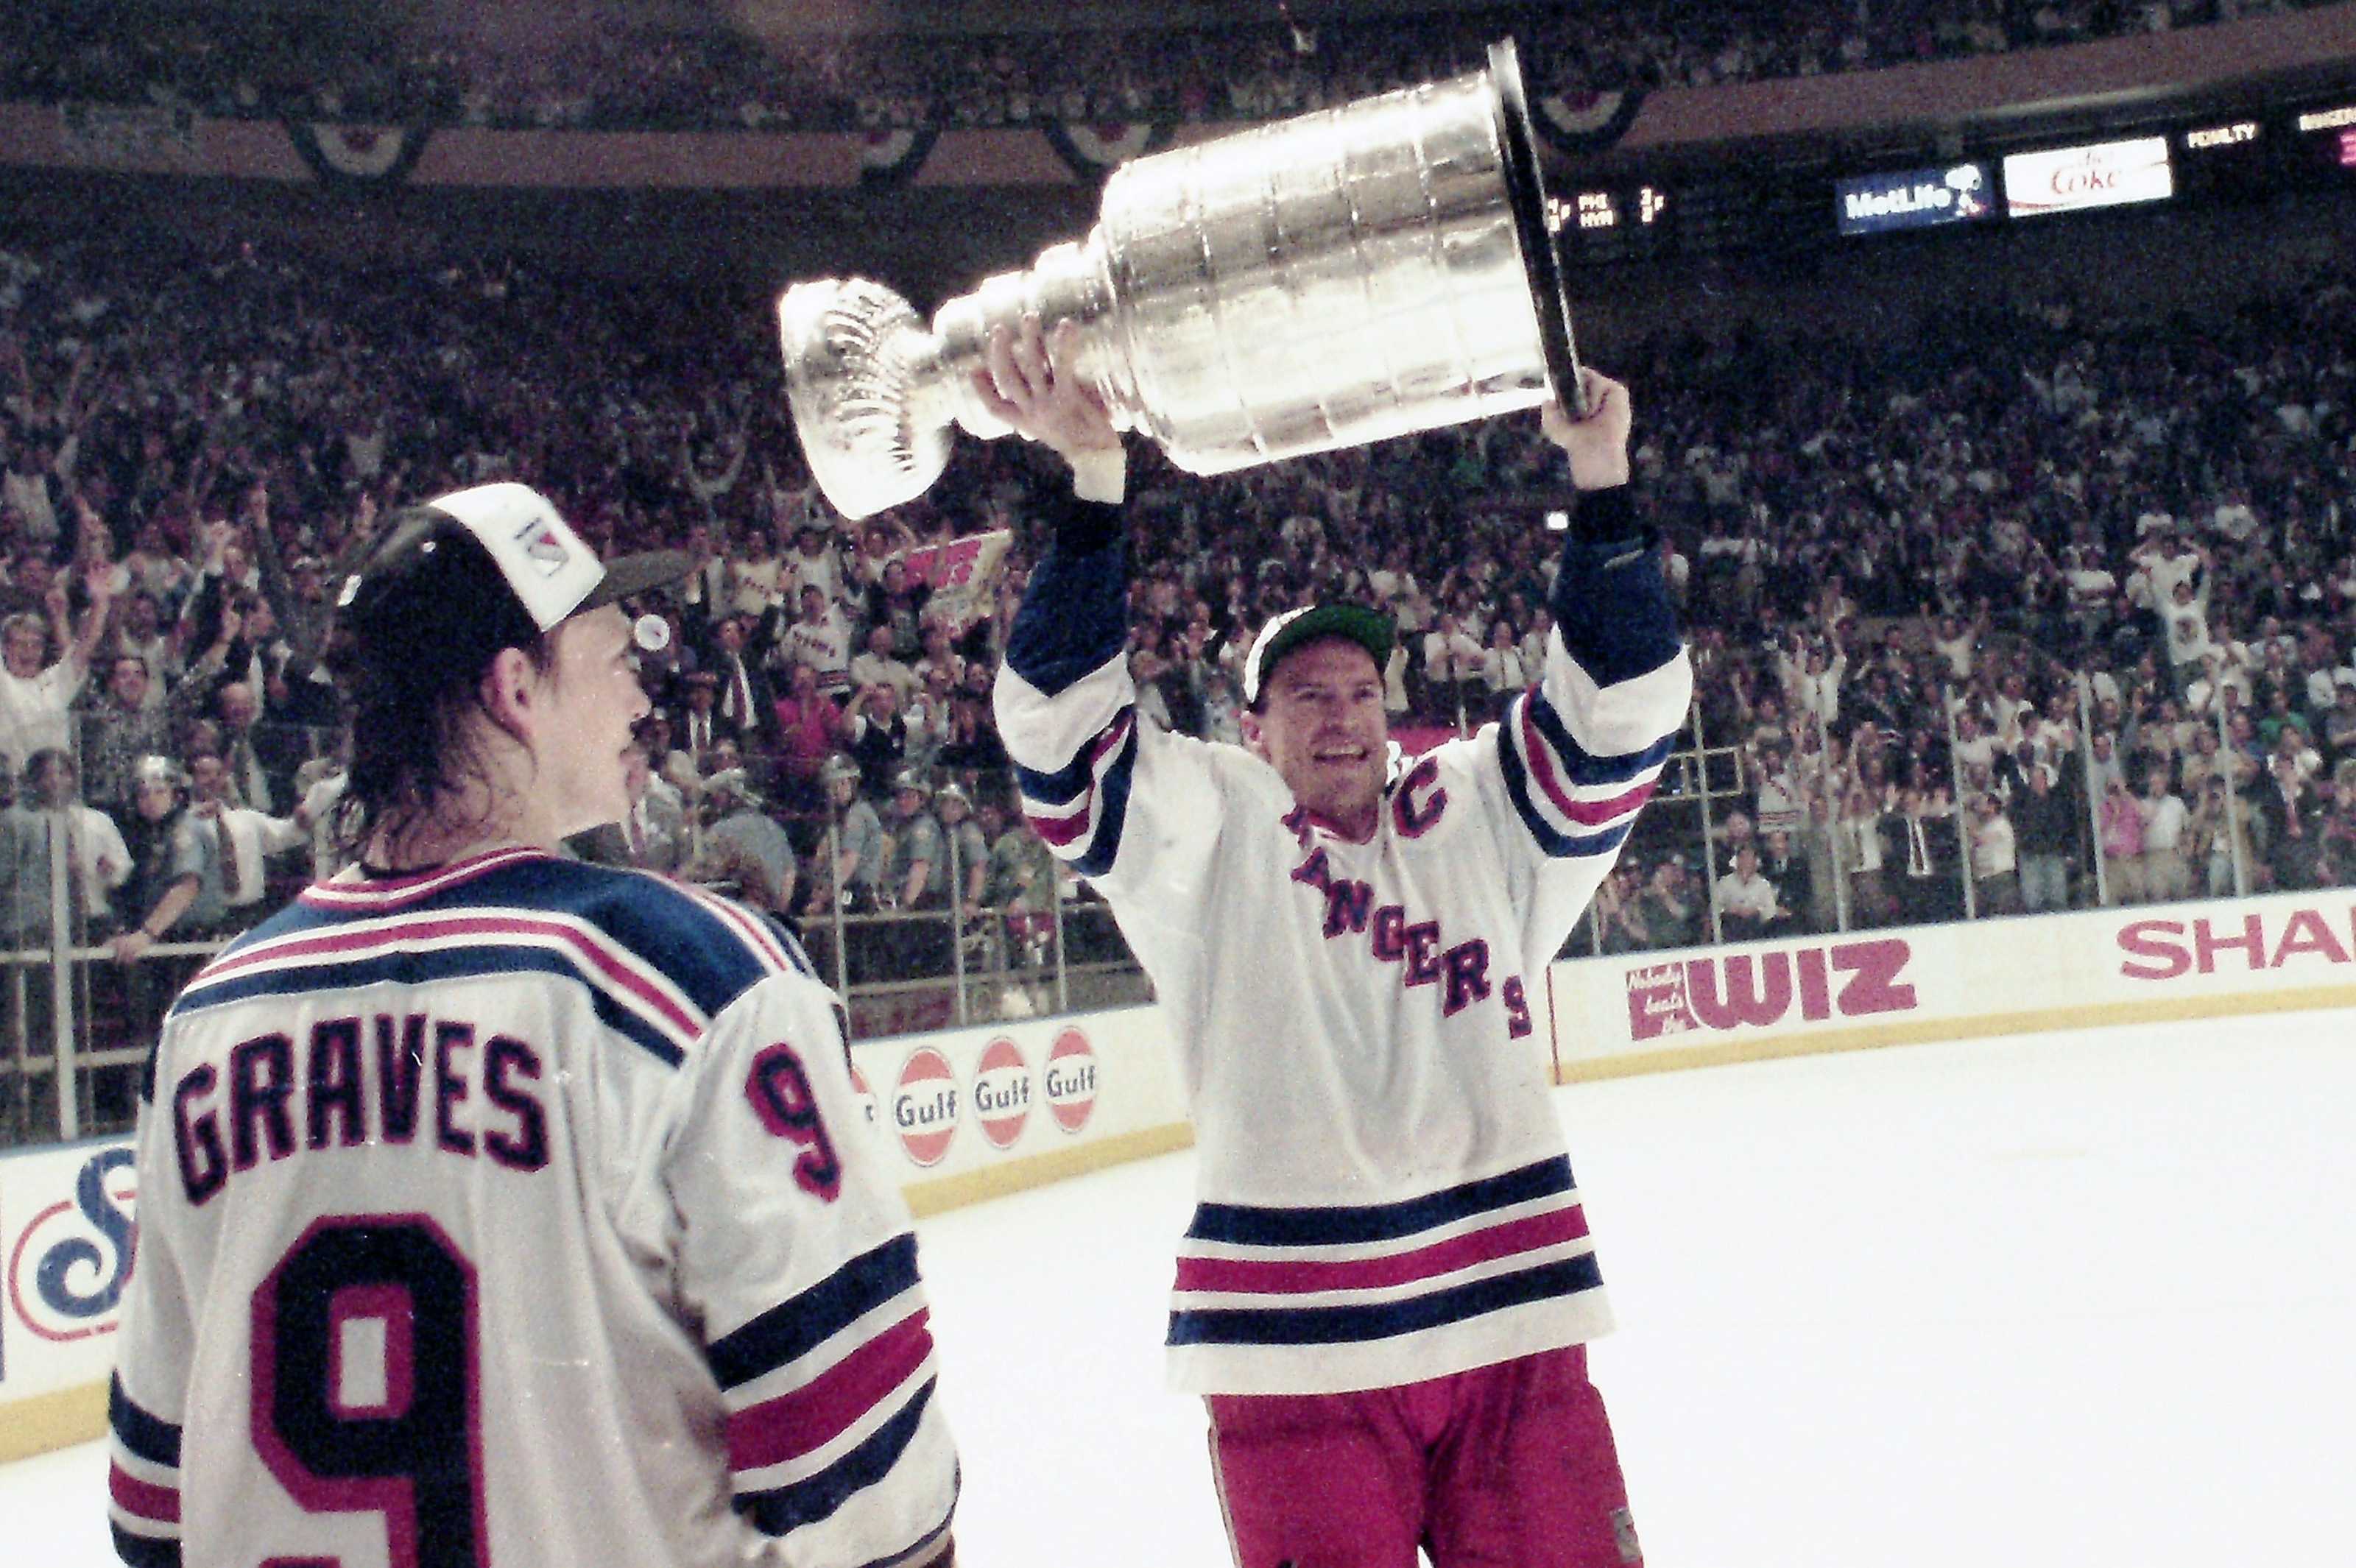 6/15/1994 newspaper The Star-Ledger - NY Rangers win Stanley Cup